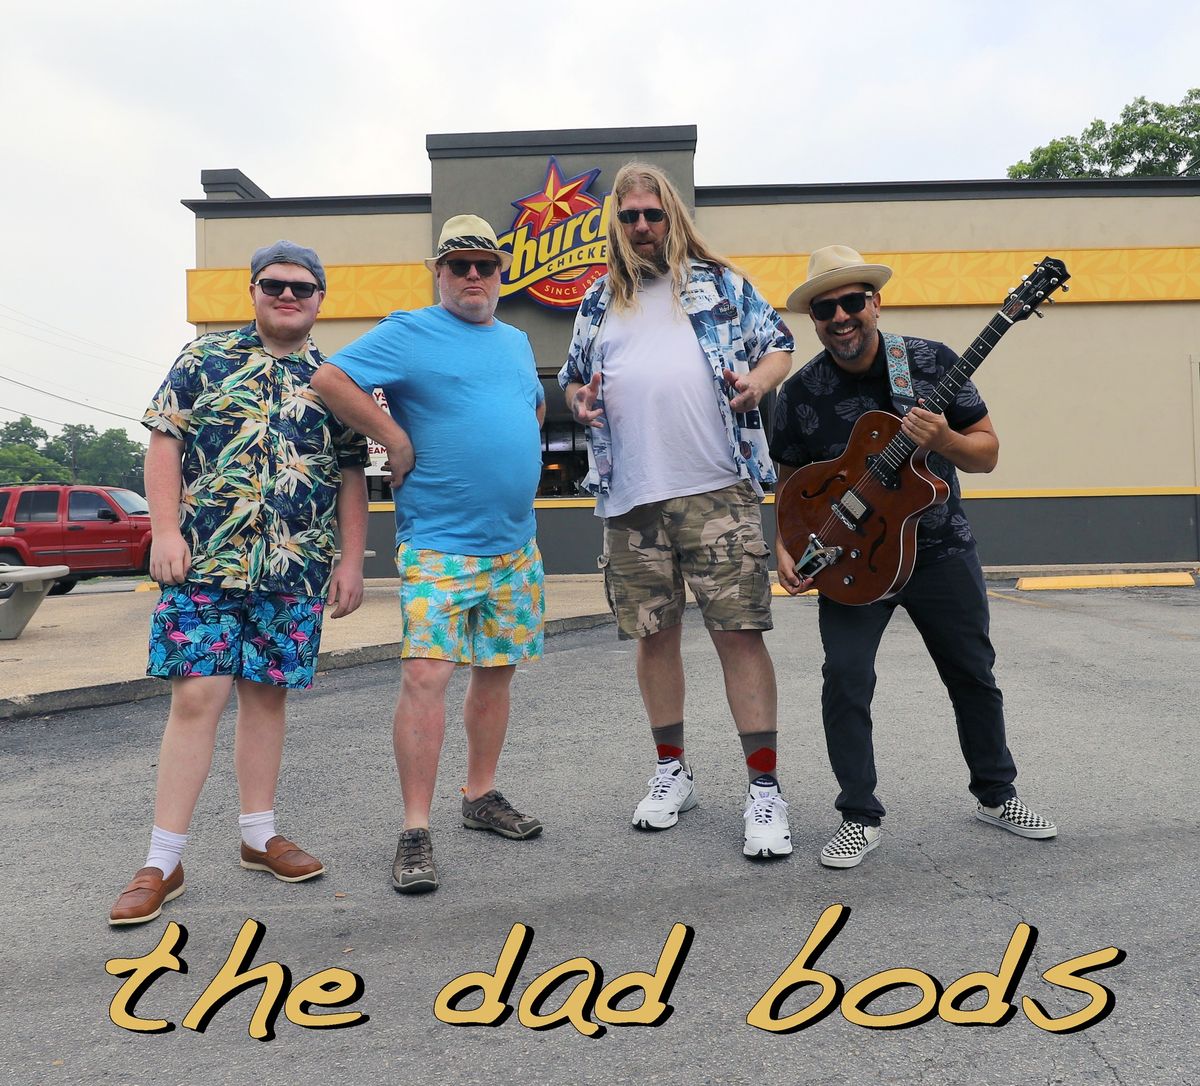 FAUST BREWING CO. Presents THE DAD BOD BAND